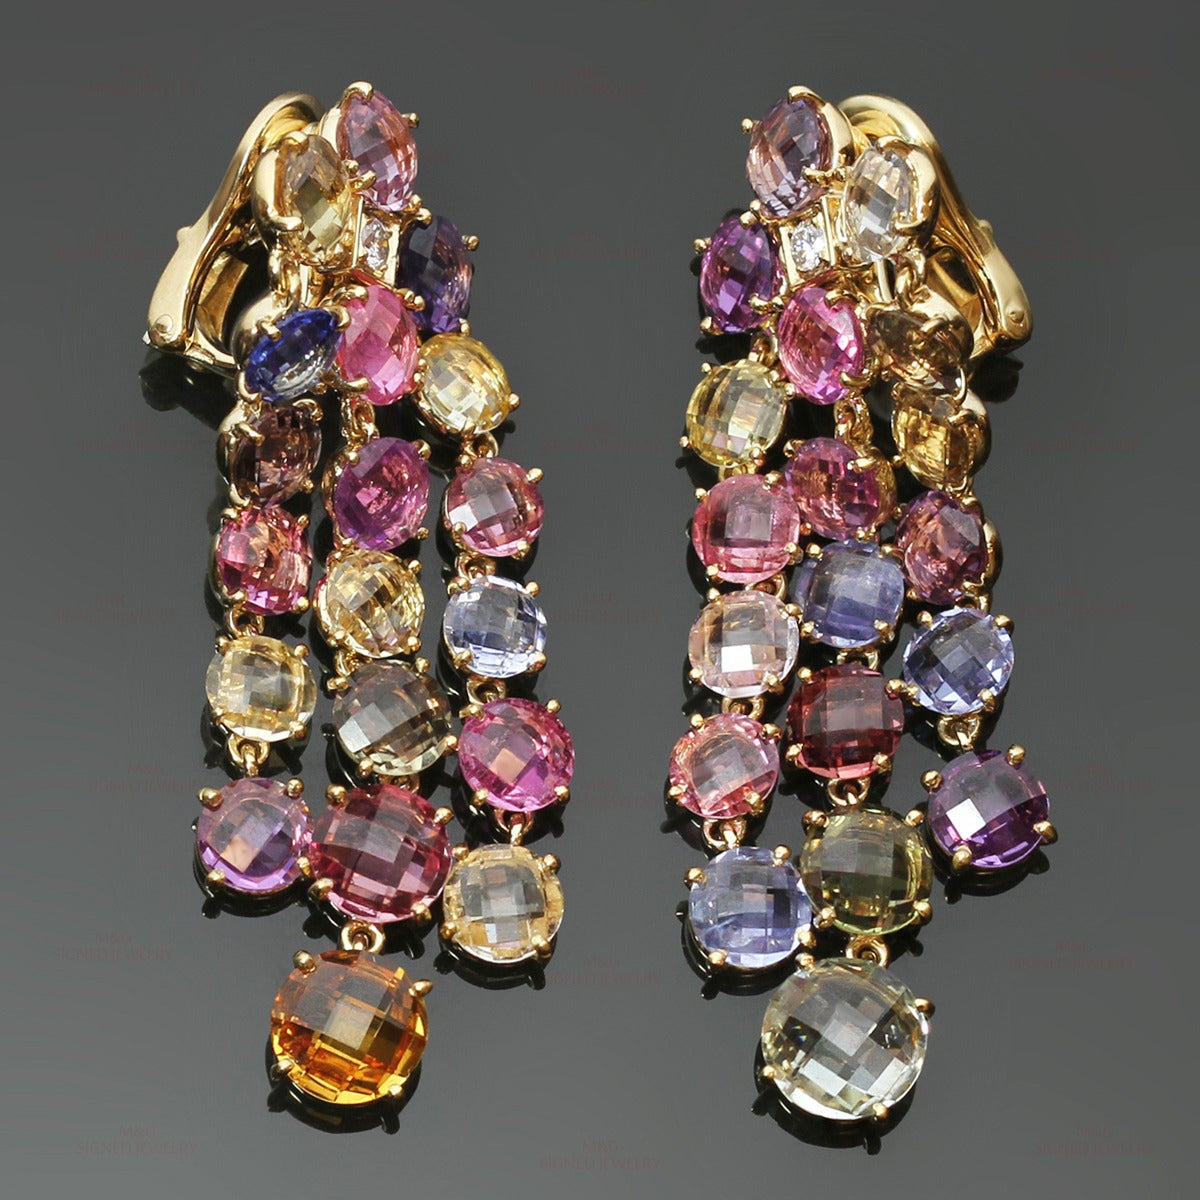 These rare Bulgari dangling earrings are made in 18k yellow gold and prong-set with colorful round faceted sapphires in yellow, orange, pink, blue, green and brown tints, accented with round sparkling diamonds of an estimated 0.12 carats. Earrings